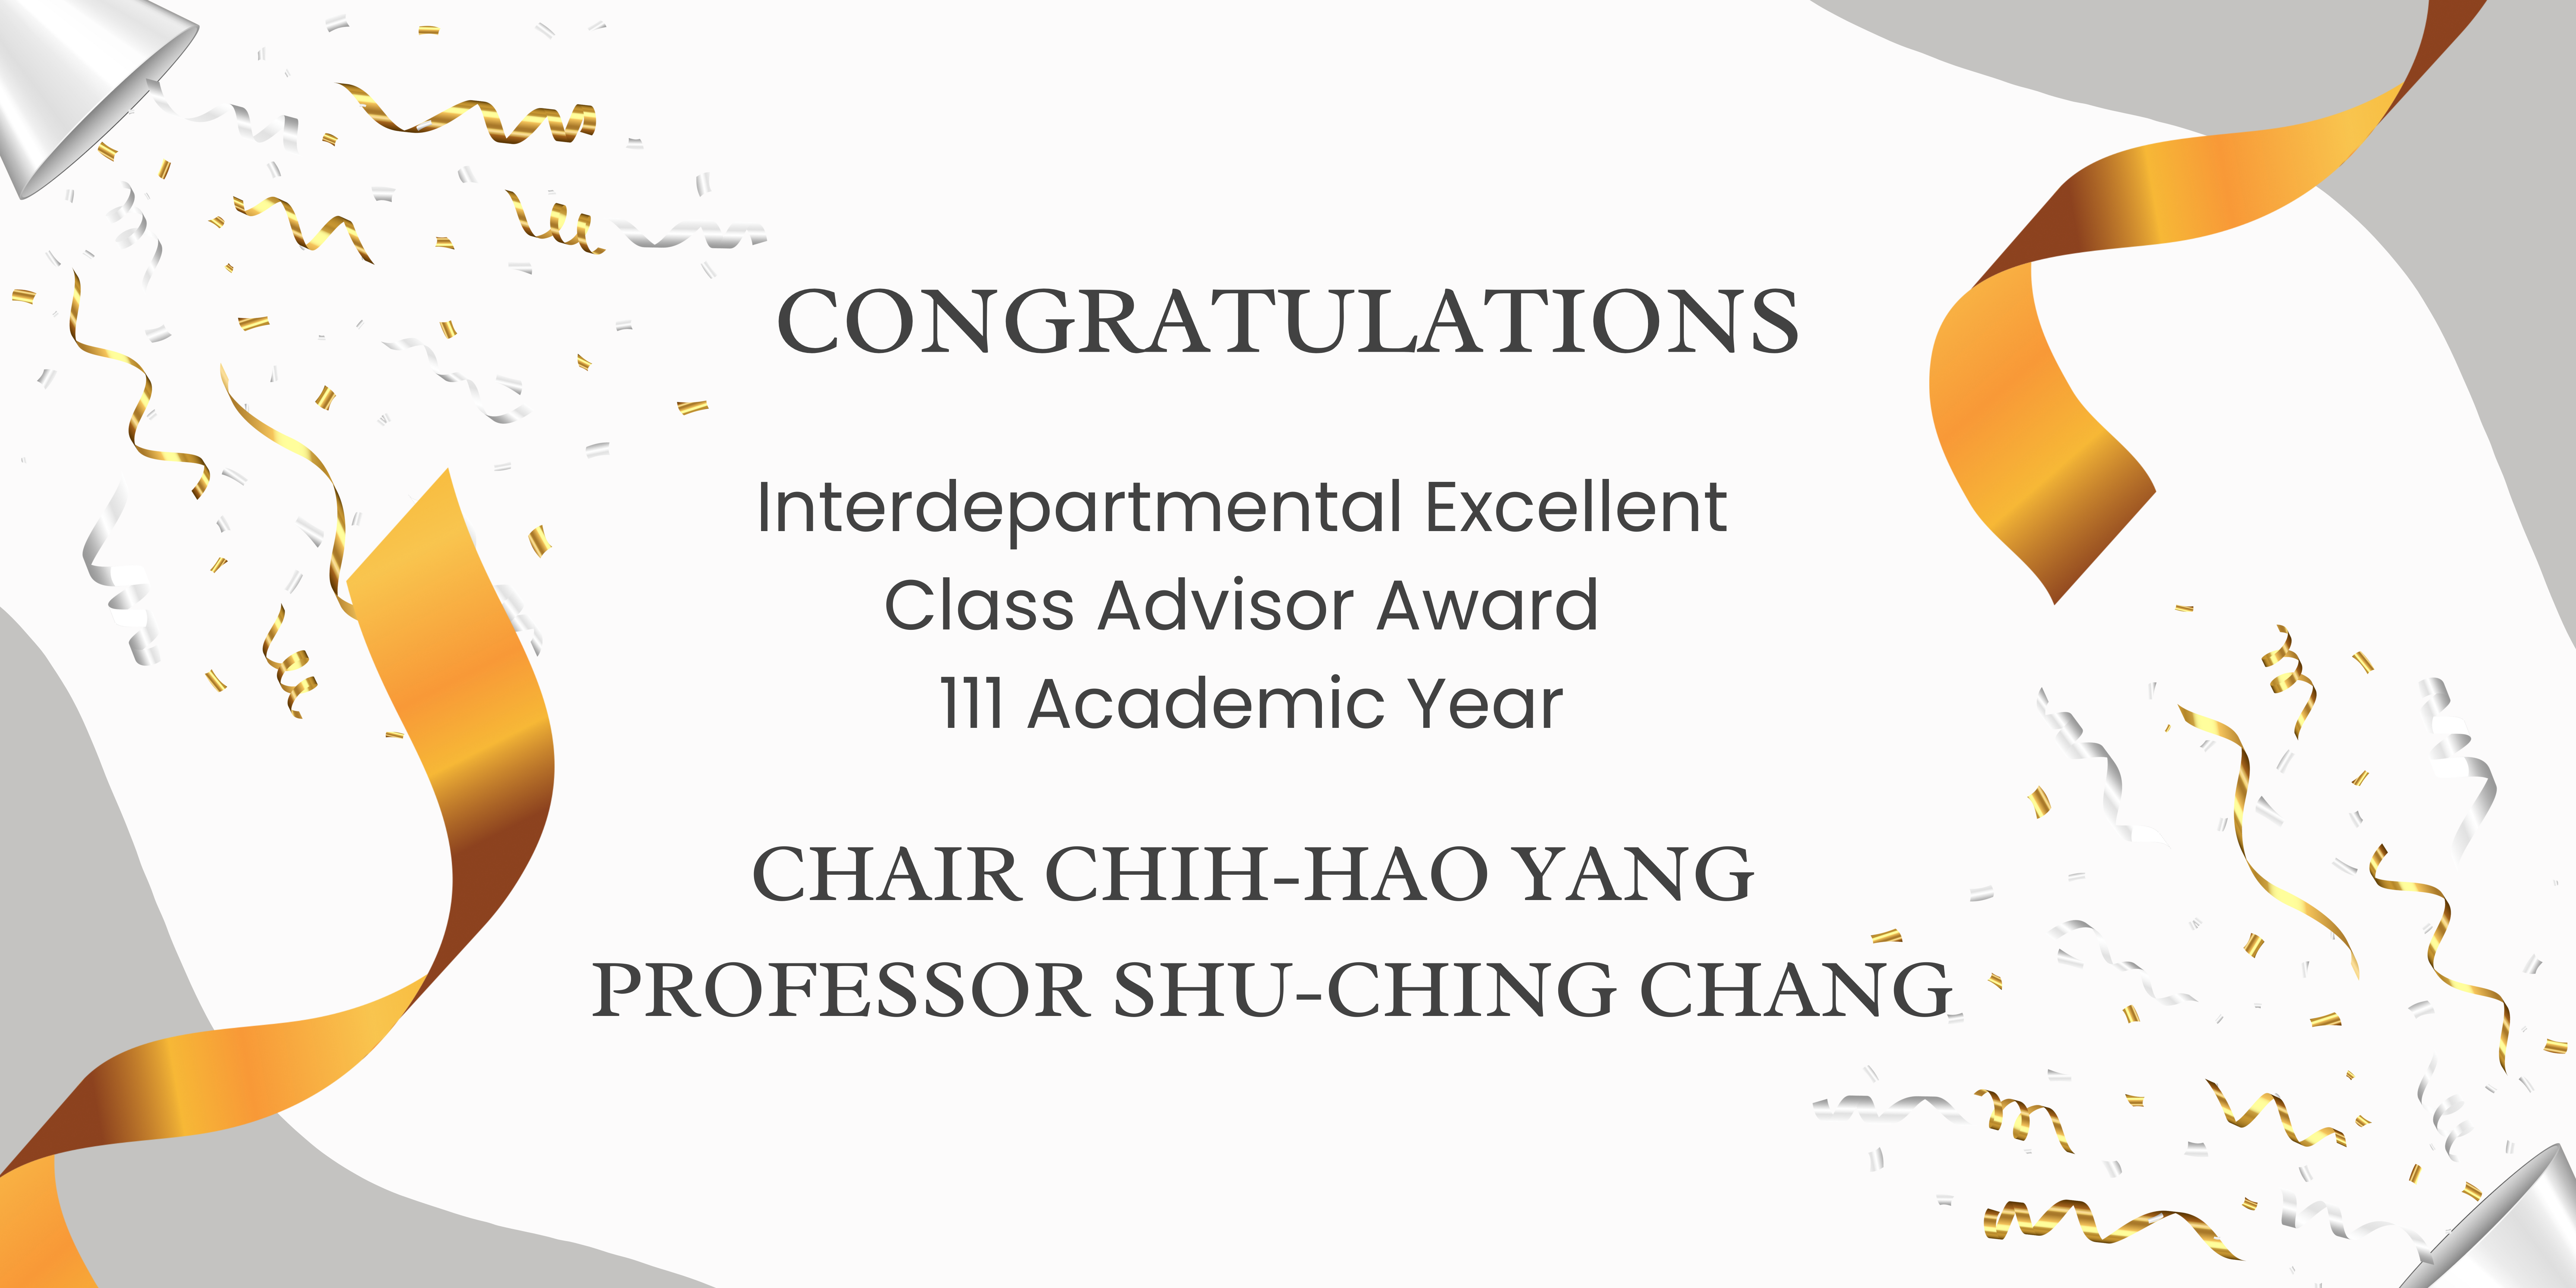 Featured image for “Congratulations to Chair Chih-Hao Yang and Professor Shu-Ching Chang for Winning Interdepartmental Excellent Class Advisor Award of 111 Academic Year”